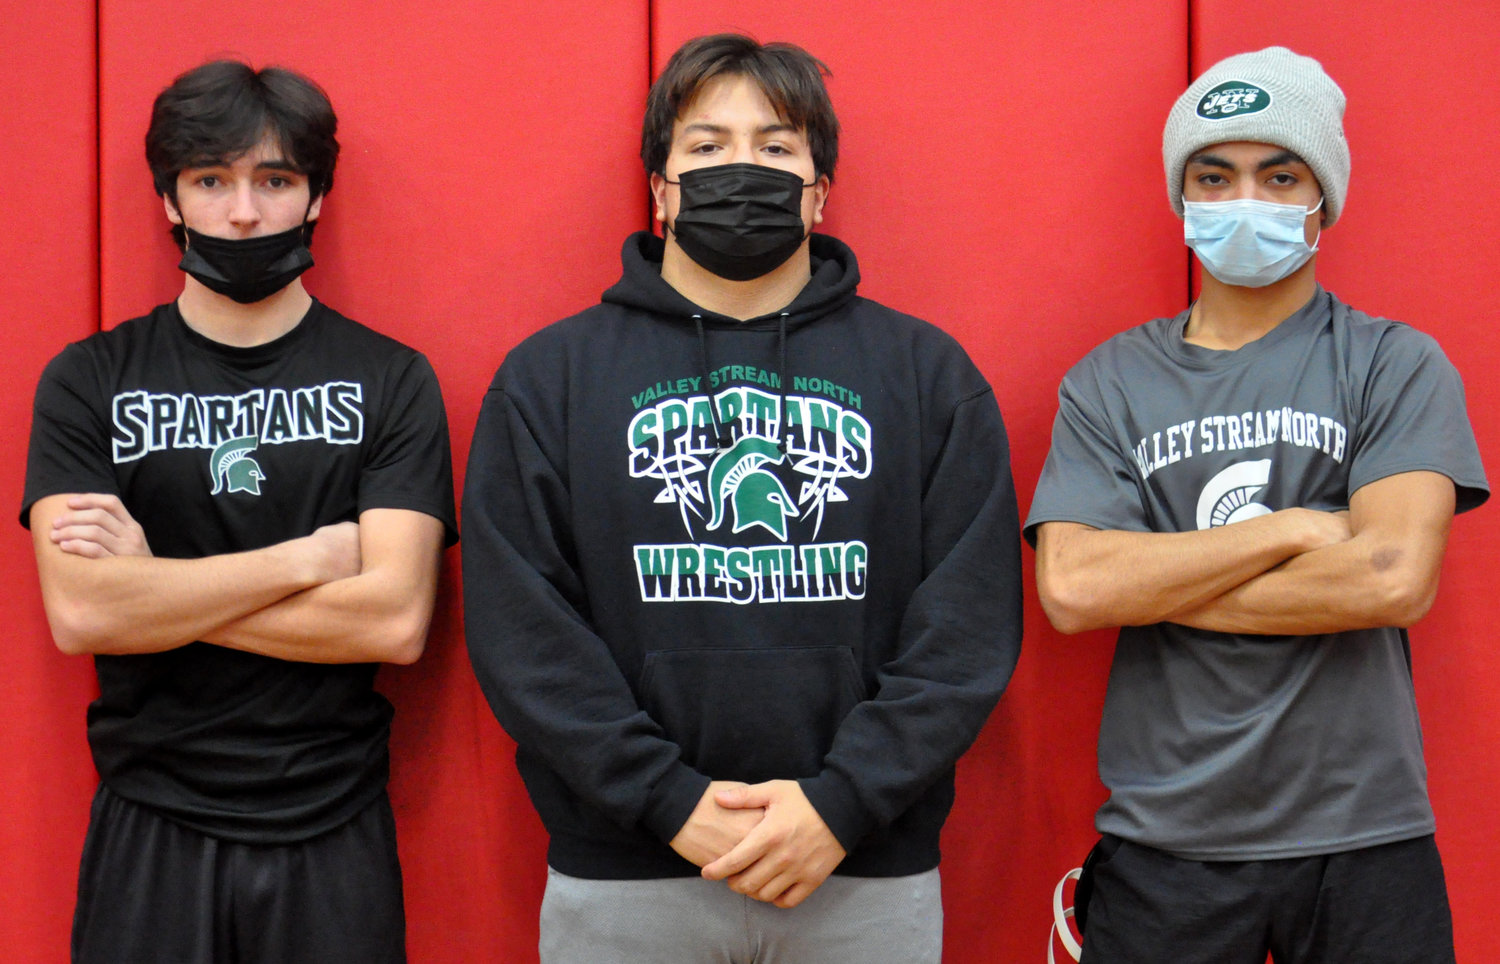 From left, Thomas Santo, Joshua Lopez and Michael Munson are leading Valley Stream North's efforts on the mat.